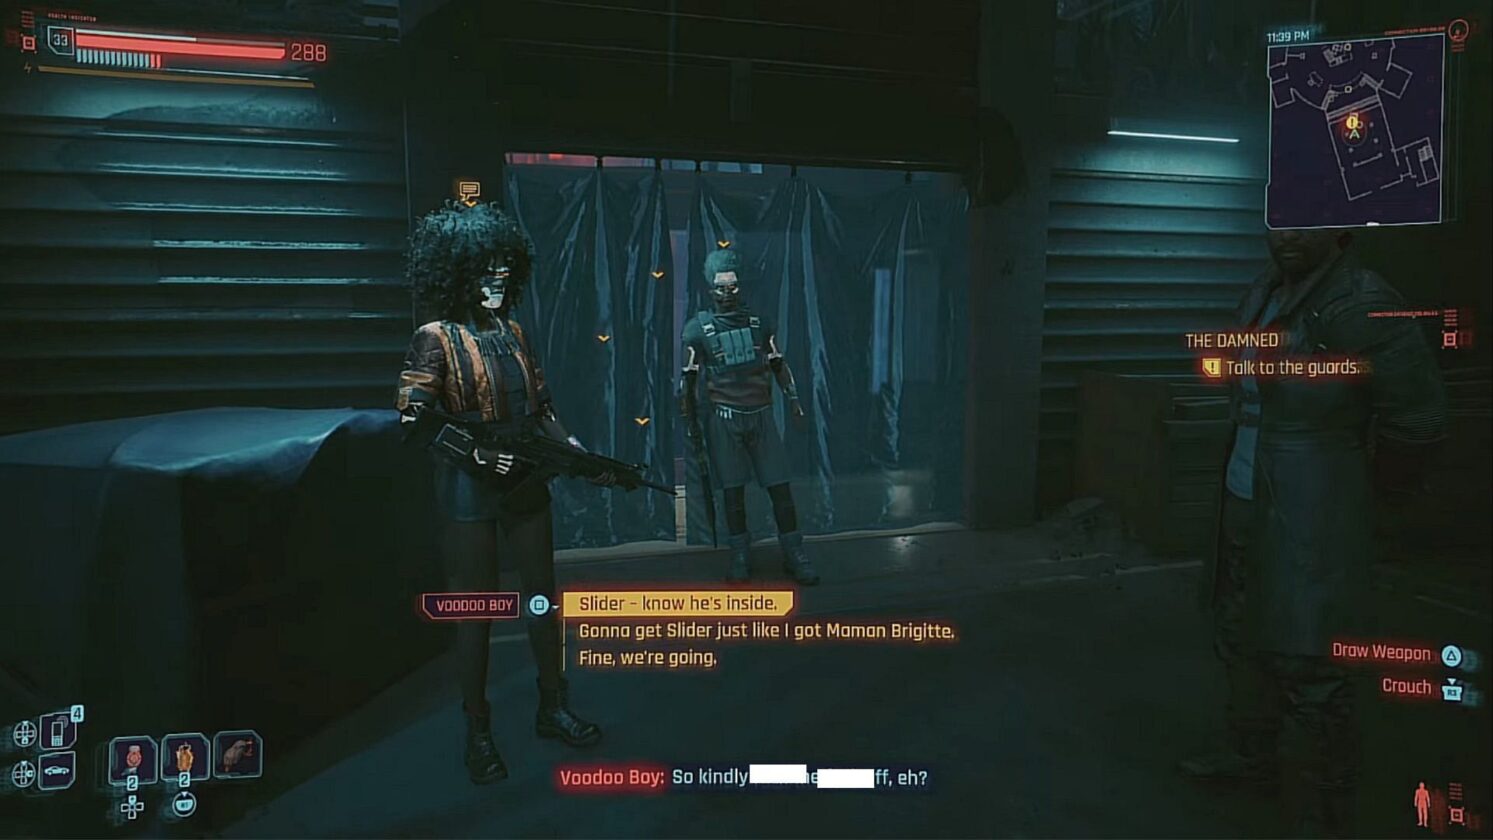 Talk to the guards in Cyberpunk 2077 the Damned